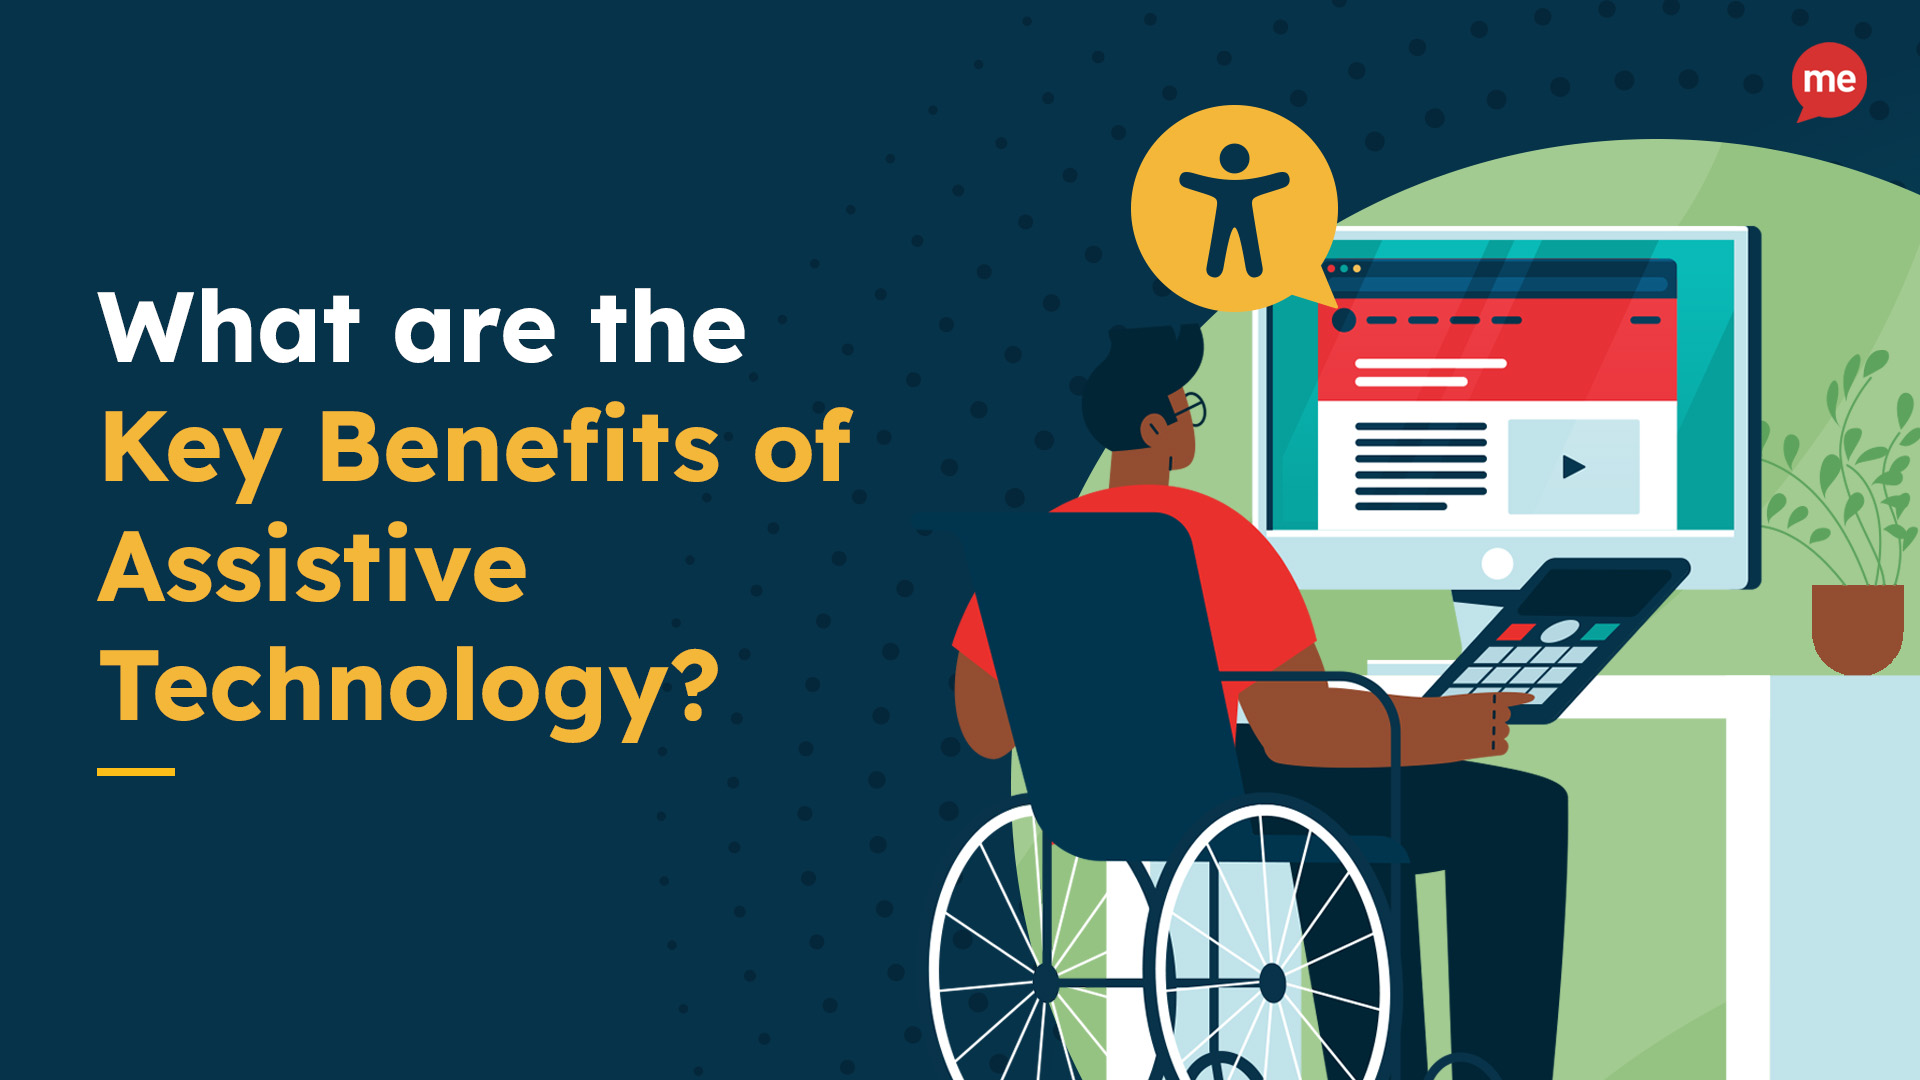 What are the Key Benefits of Assistive Technology